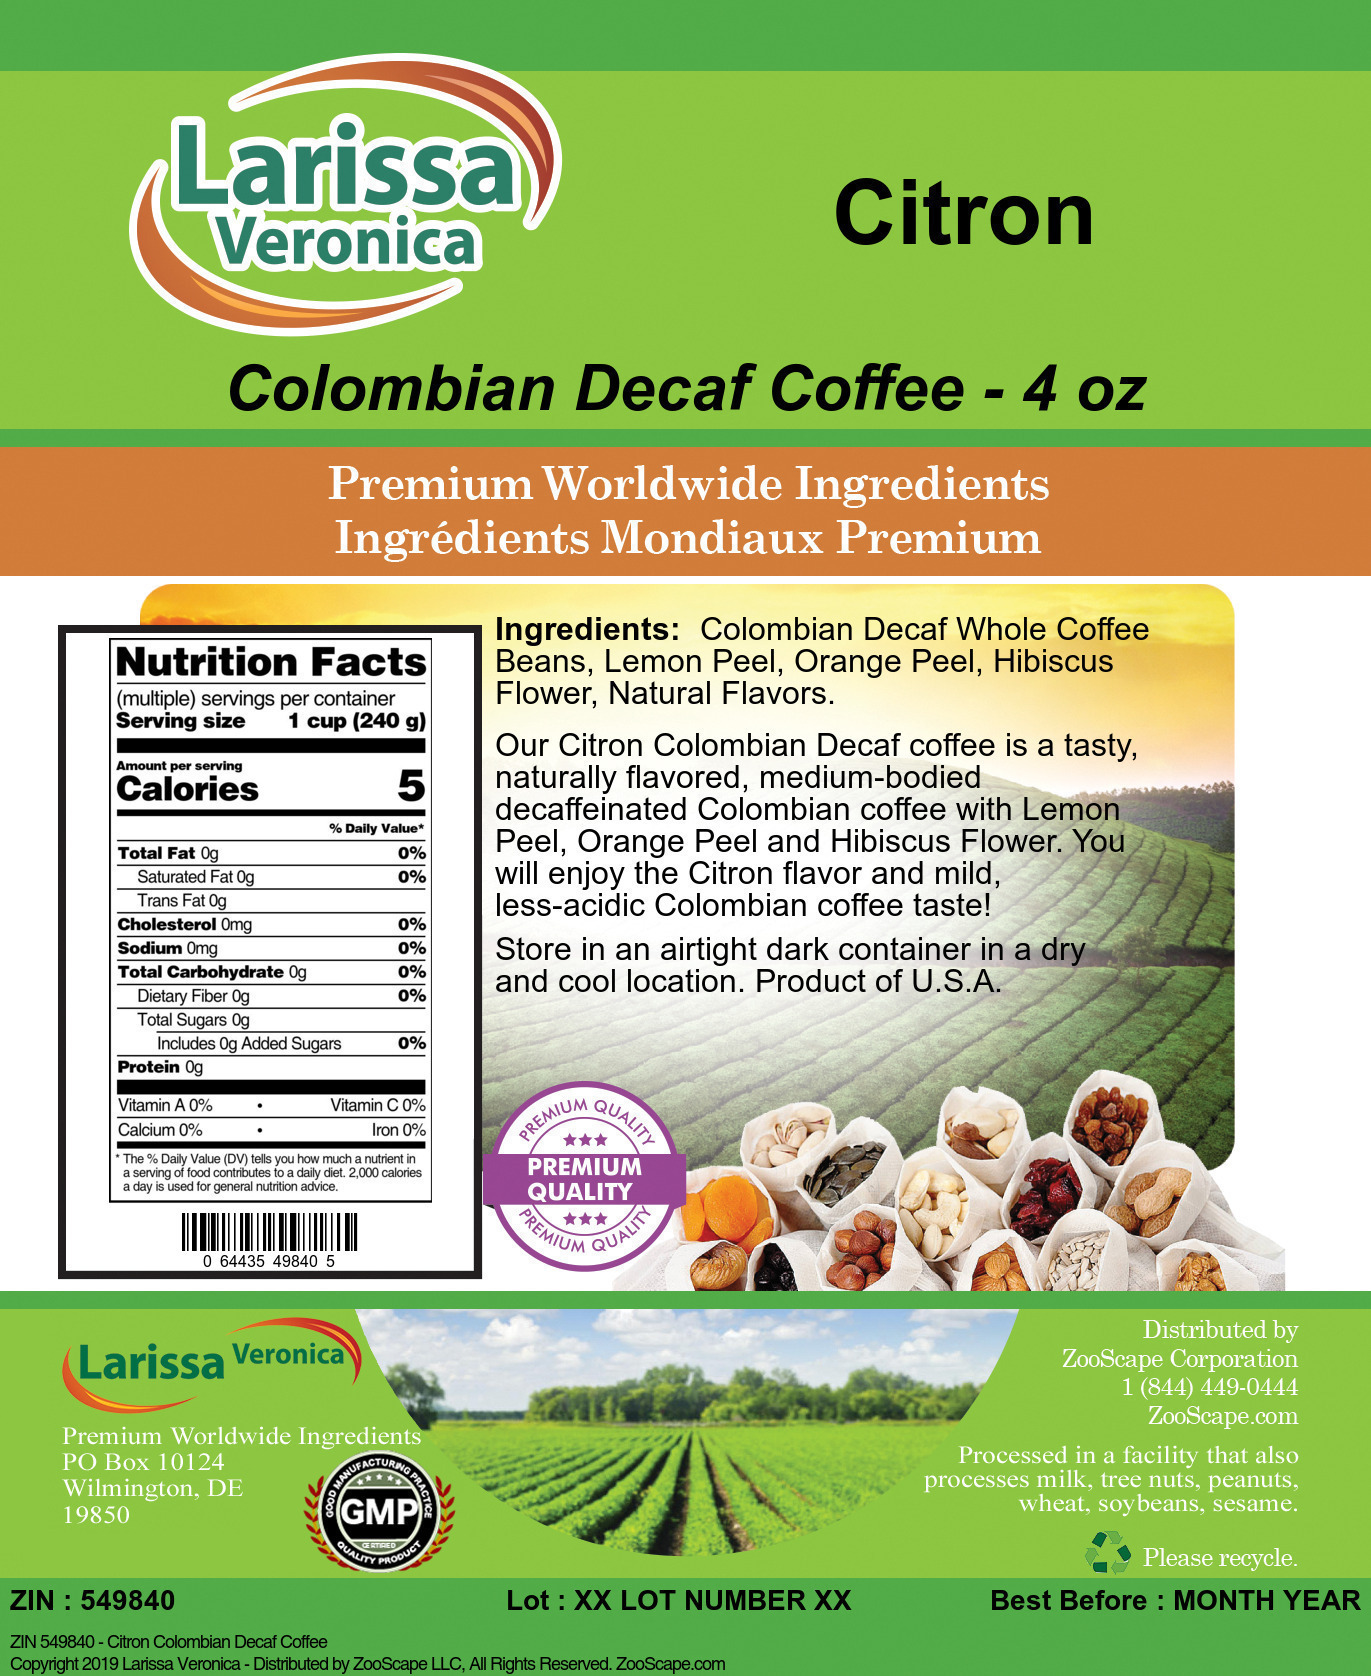 Citron Colombian Decaf Coffee - Label